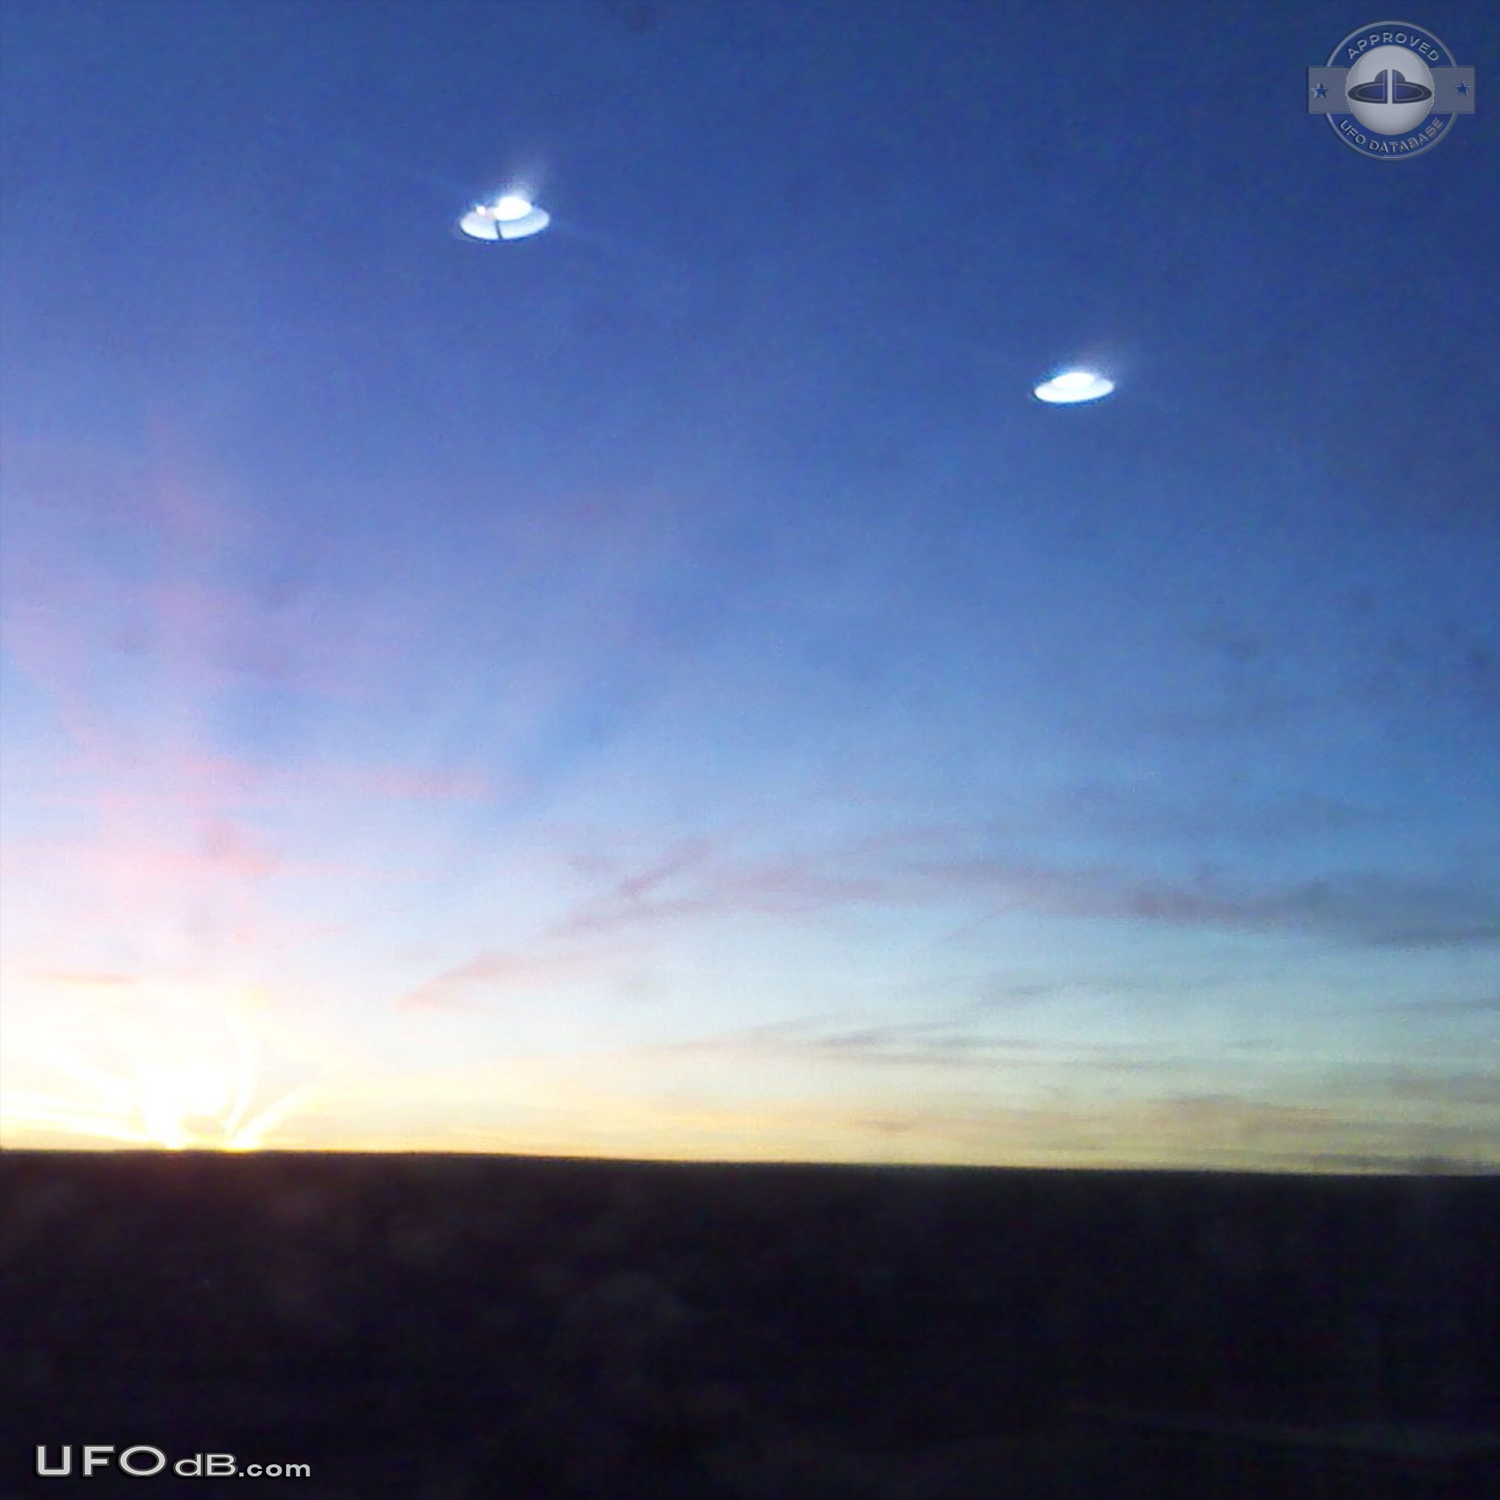 Two Saucer with dome UFOs caught on Picture in the Bahamas - 2012 UFO Picture #495-1